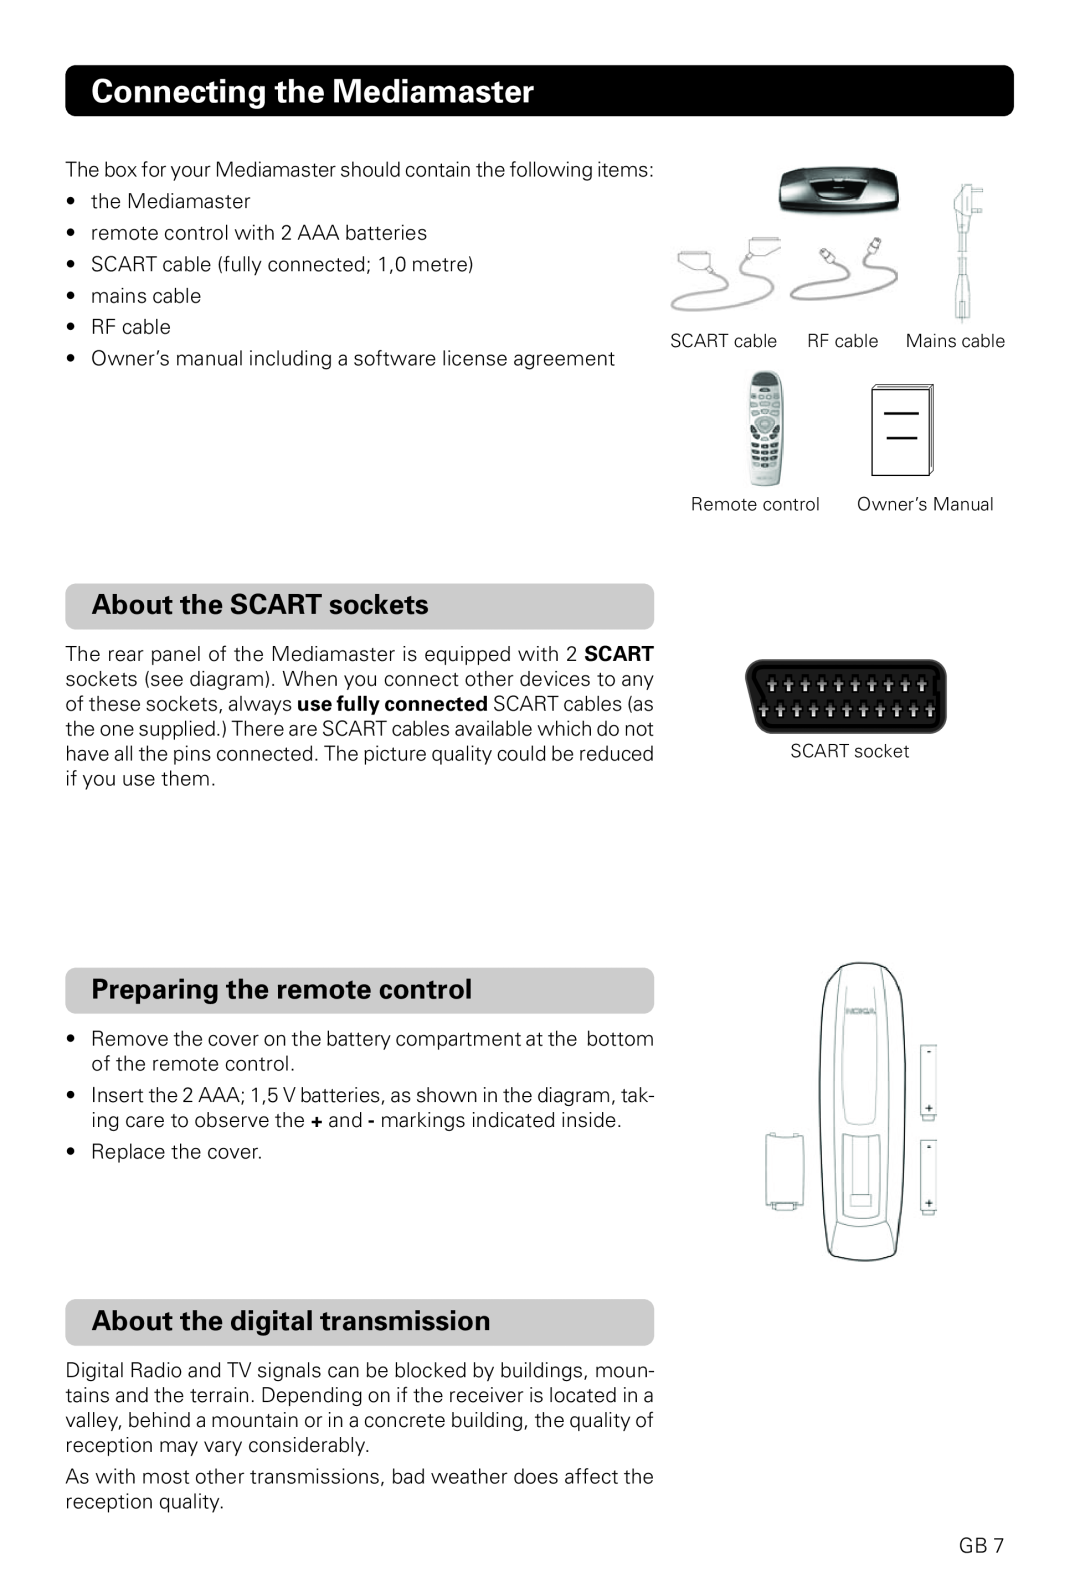 Nokia 221 T owner manual Connecting the Mediamaster, About the SCART sockets, Preparing the remote control 